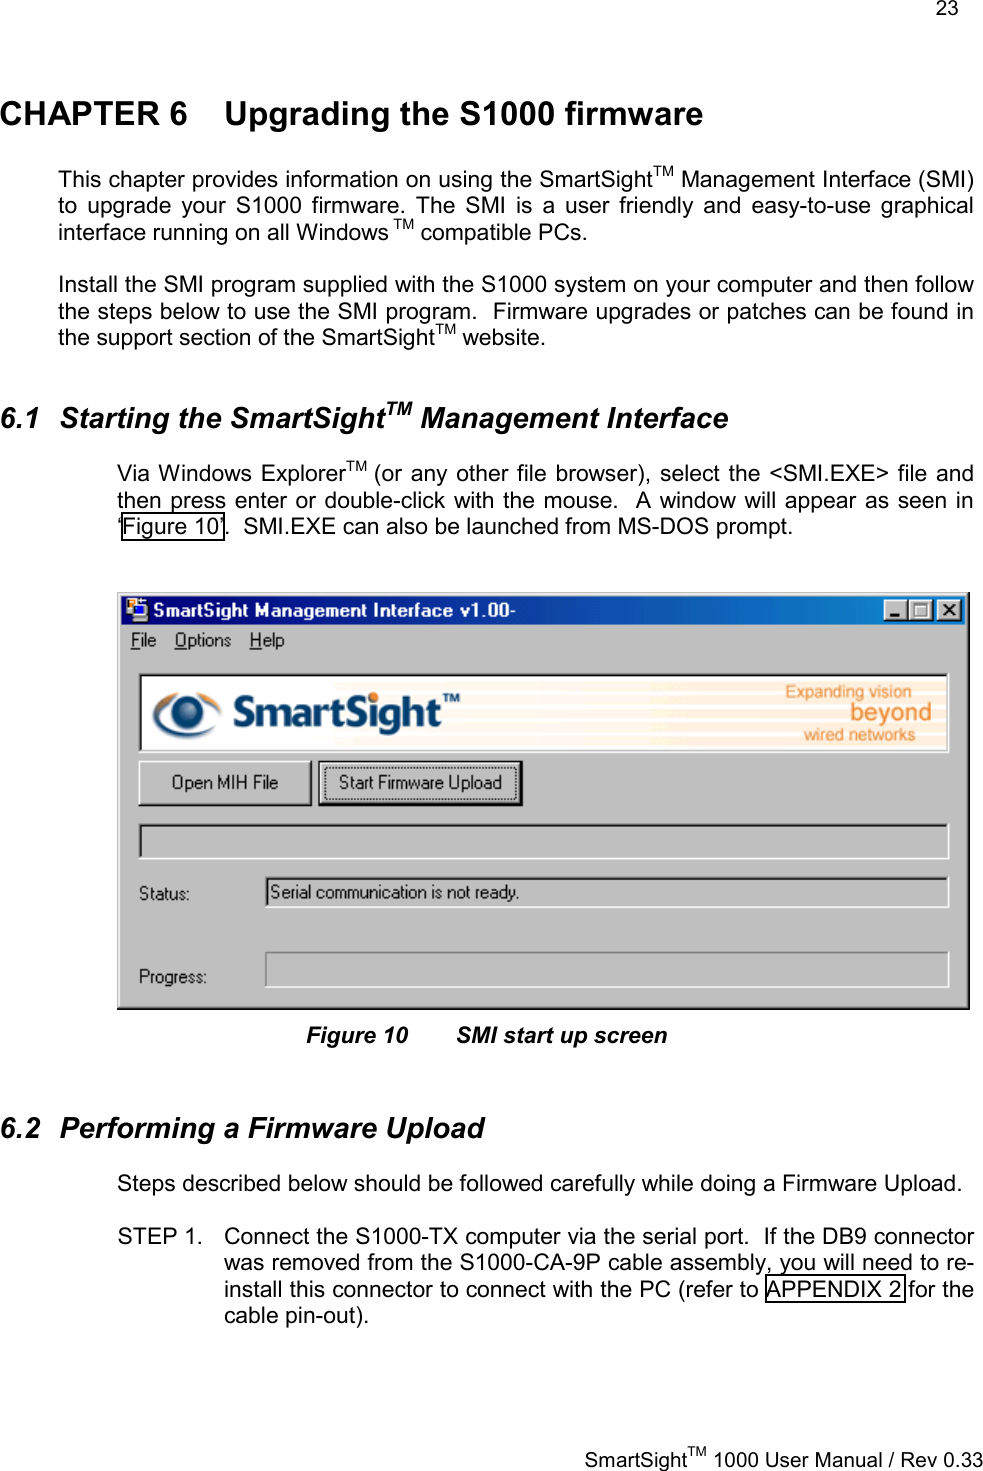    23   SmartSightTM 1000 User Manual / Rev 0.33  CHAPTER 6  Upgrading the S1000 firmware  This chapter provides information on using the SmartSightTM Management Interface (SMI) to upgrade your S1000 firmware. The SMI is a user friendly and easy-to-use graphical interface running on all Windows TM compatible PCs.  Install the SMI program supplied with the S1000 system on your computer and then follow the steps below to use the SMI program.  Firmware upgrades or patches can be found in the support section of the SmartSightTM website.  6.1 Starting the SmartSightTM Management Interface Via Windows ExplorerTM  (or any other file browser), select the &lt;SMI.EXE&gt; file and then press enter or double-click with the mouse.  A window will appear as seen in ‘Figure 10’.  SMI.EXE can also be launched from MS-DOS prompt.    Figure 10  SMI start up screen  6.2  Performing a Firmware Upload Steps described below should be followed carefully while doing a Firmware Upload.  STEP 1.  Connect the S1000-TX computer via the serial port.  If the DB9 connector was removed from the S1000-CA-9P cable assembly, you will need to re-install this connector to connect with the PC (refer to APPENDIX 2 for the cable pin-out).  